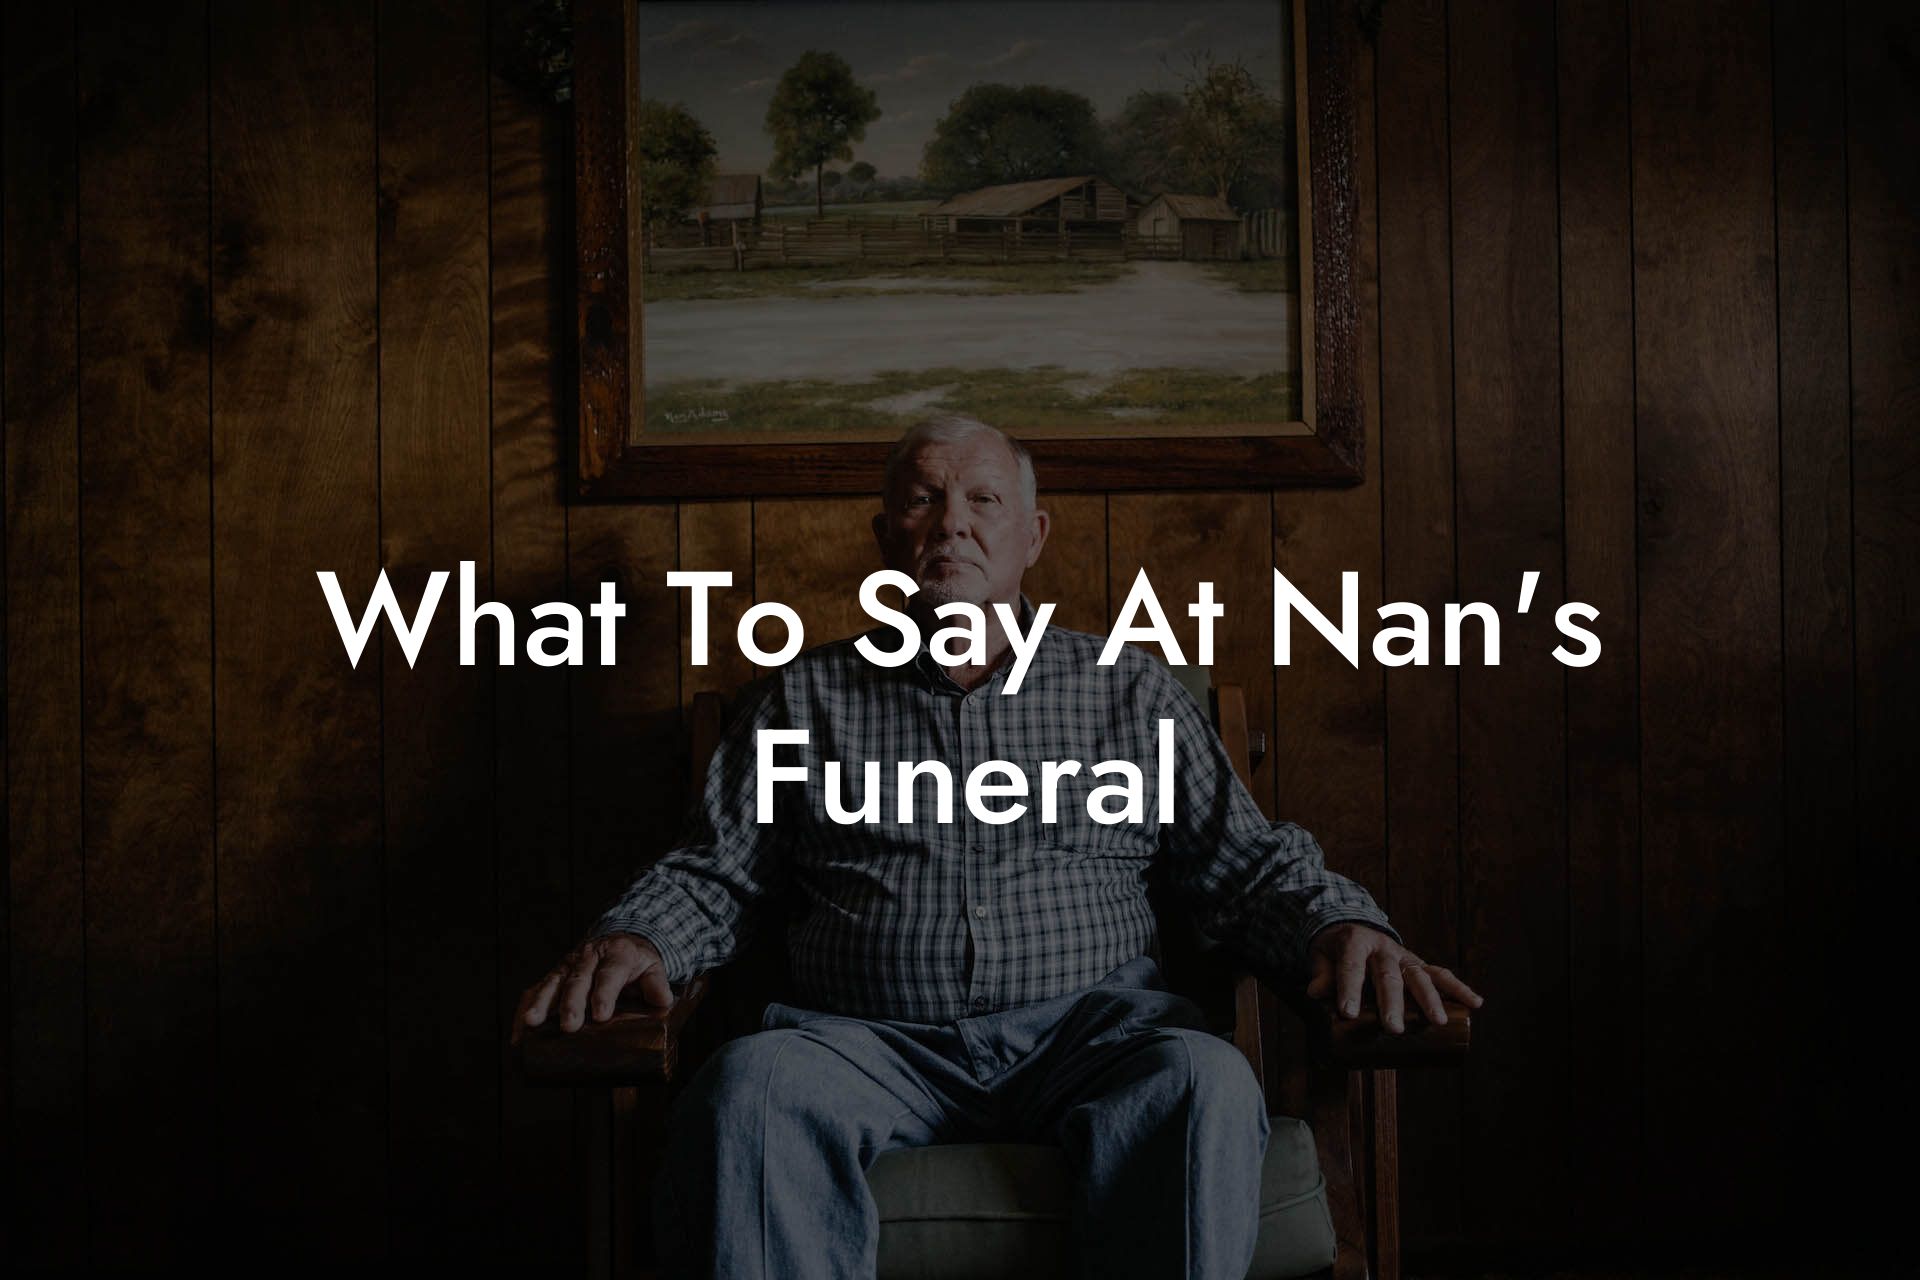 What To Say At Nan's Funeral